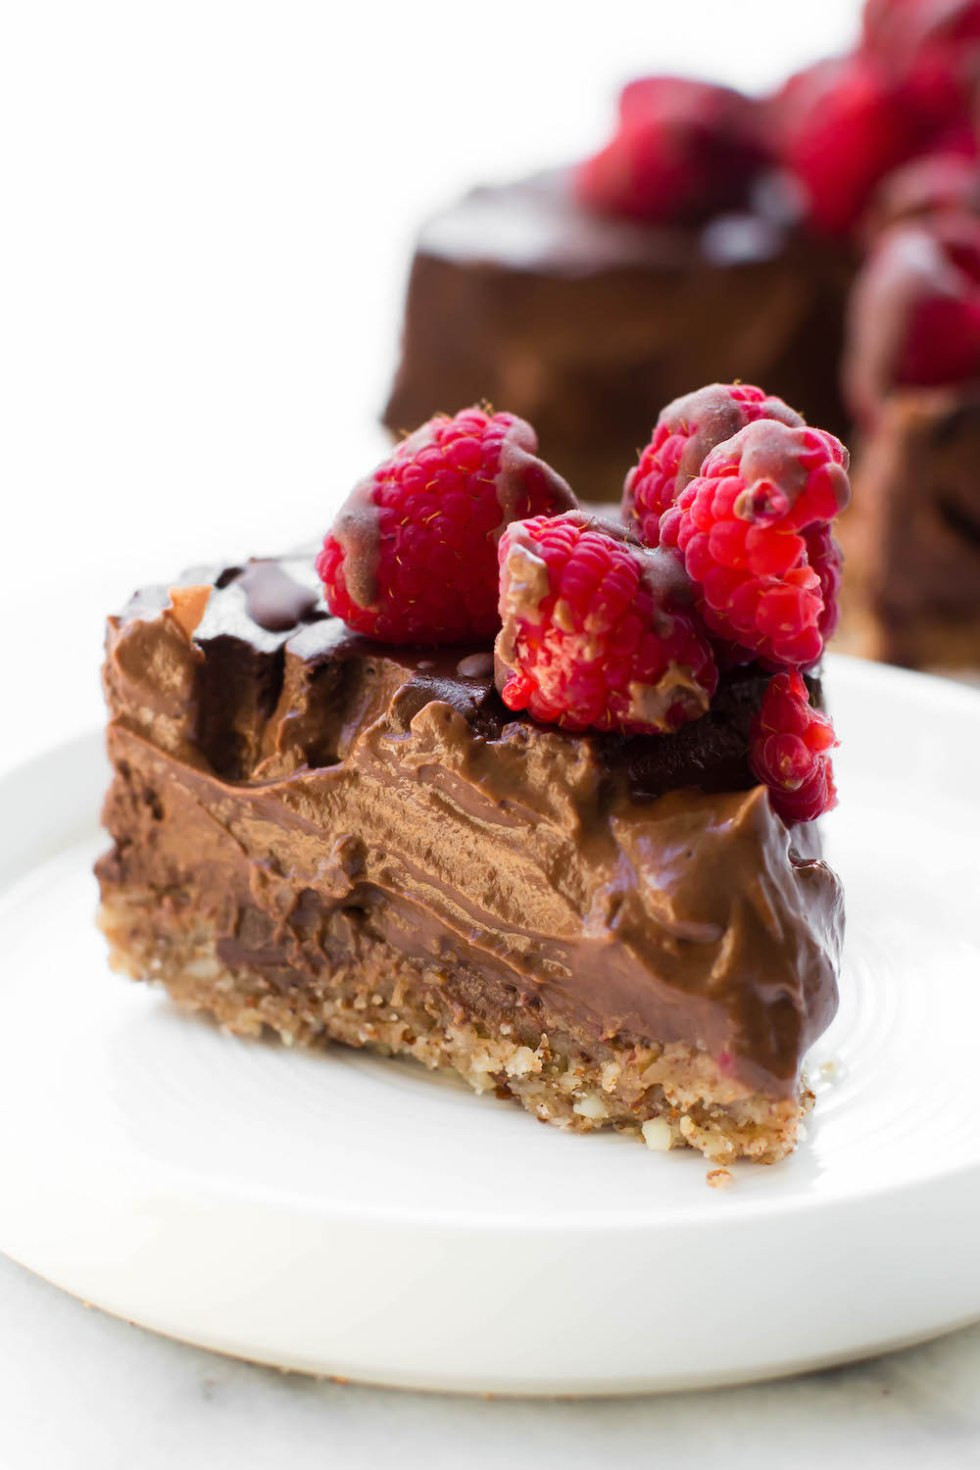 Low Calorie Chocolate Mousse
 Low Fat Chocolate Mousse Cake Vegan & Gluten Free